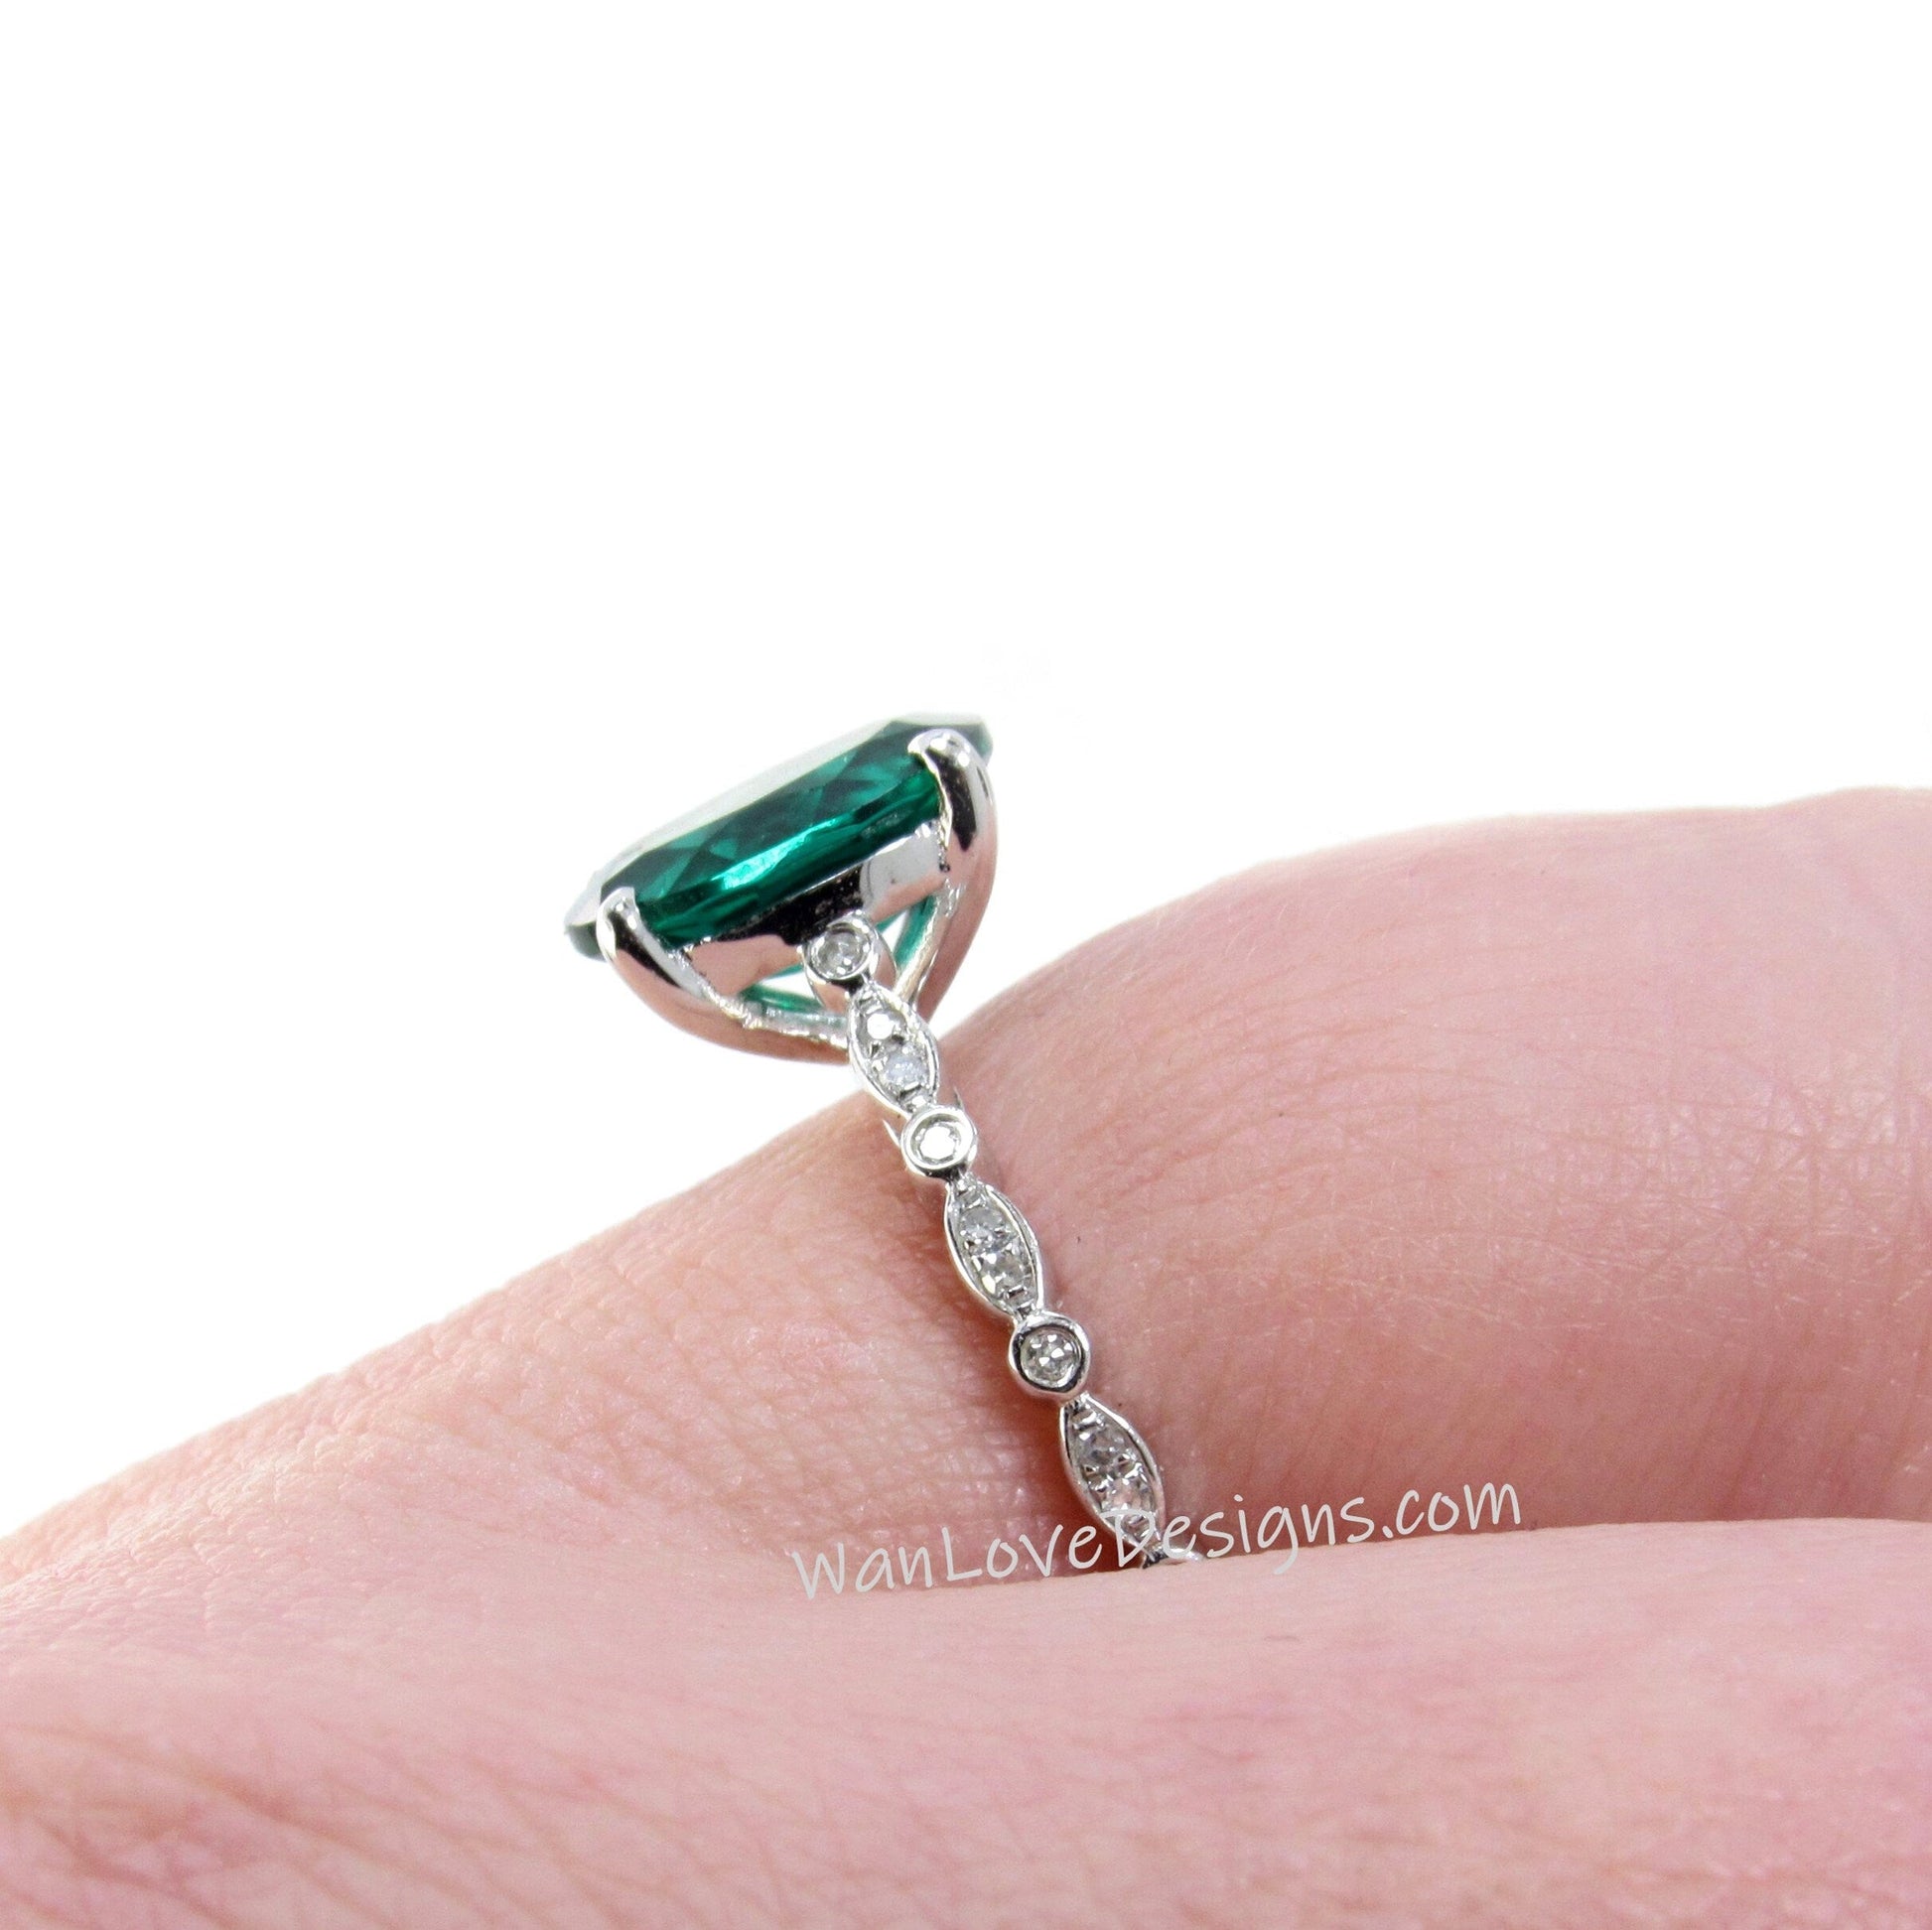 3ct Vintage Oval Emerald Diamonds Scalloped Art Deco Solitaire Engagement Ring, 18k White Gold Ring, Ready to Ship Ring Wan Love Designs